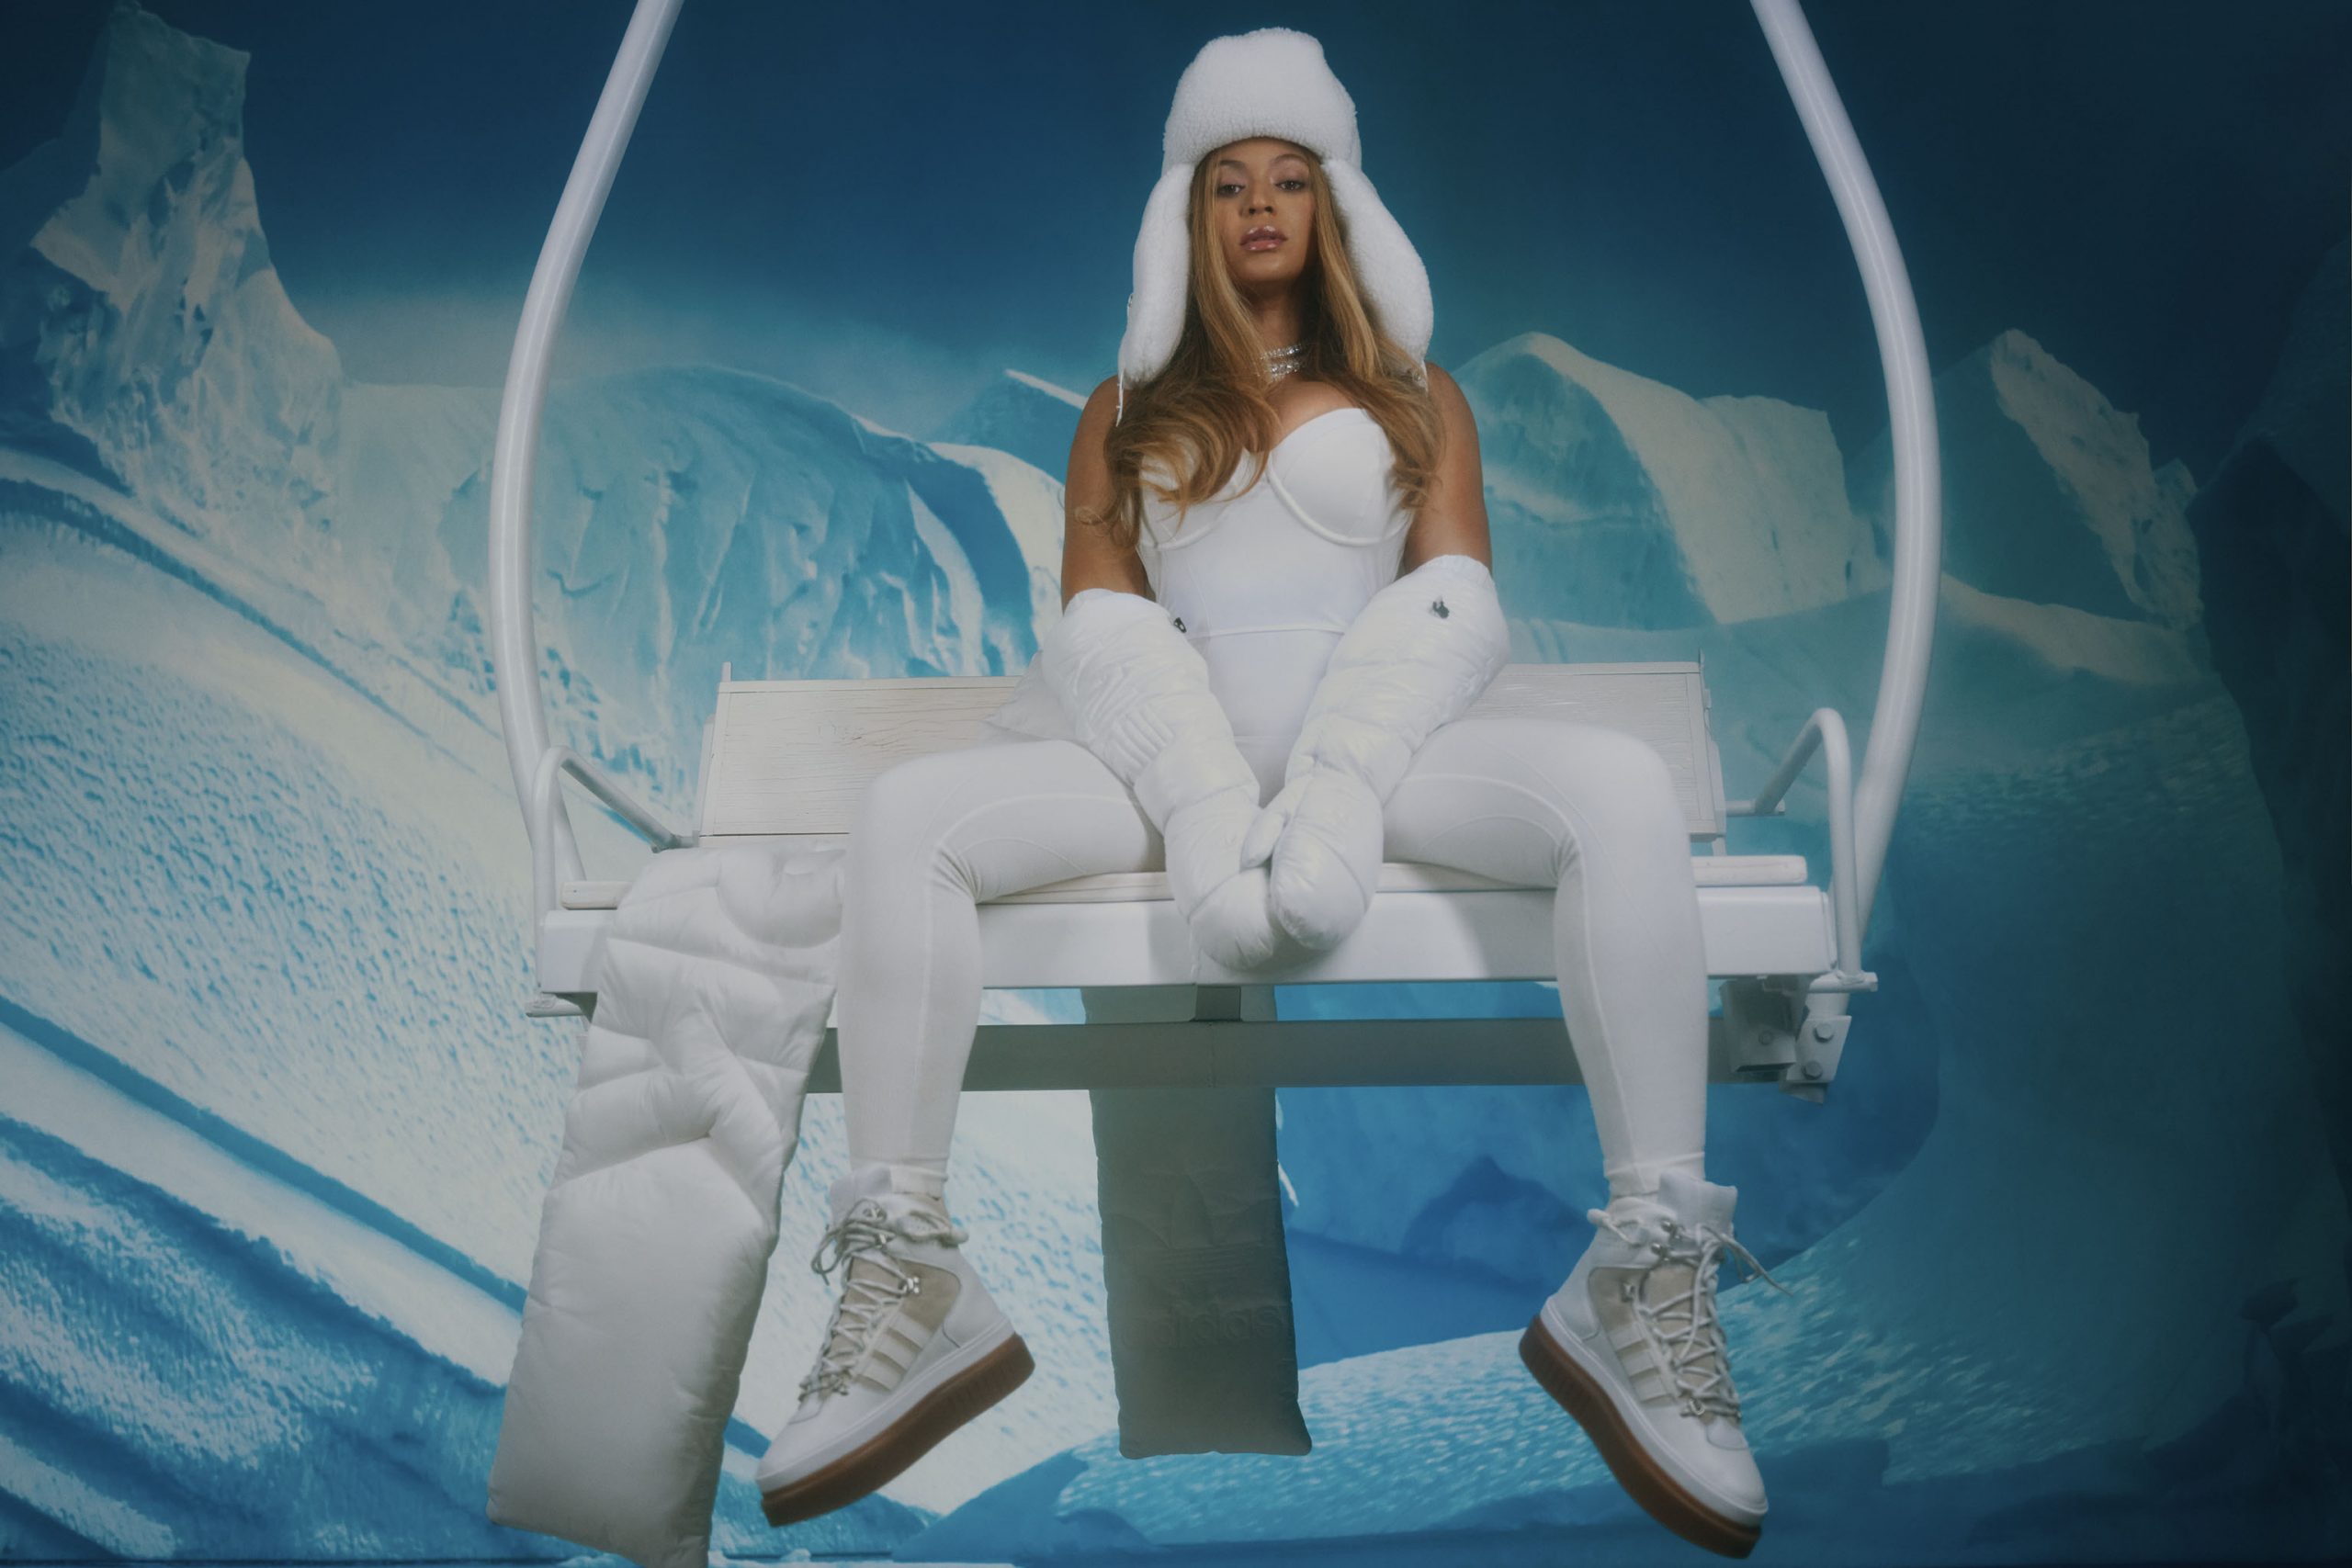 Beyonce’s Ivy Park x Adidas Range Teases Icy Park Winter Collection